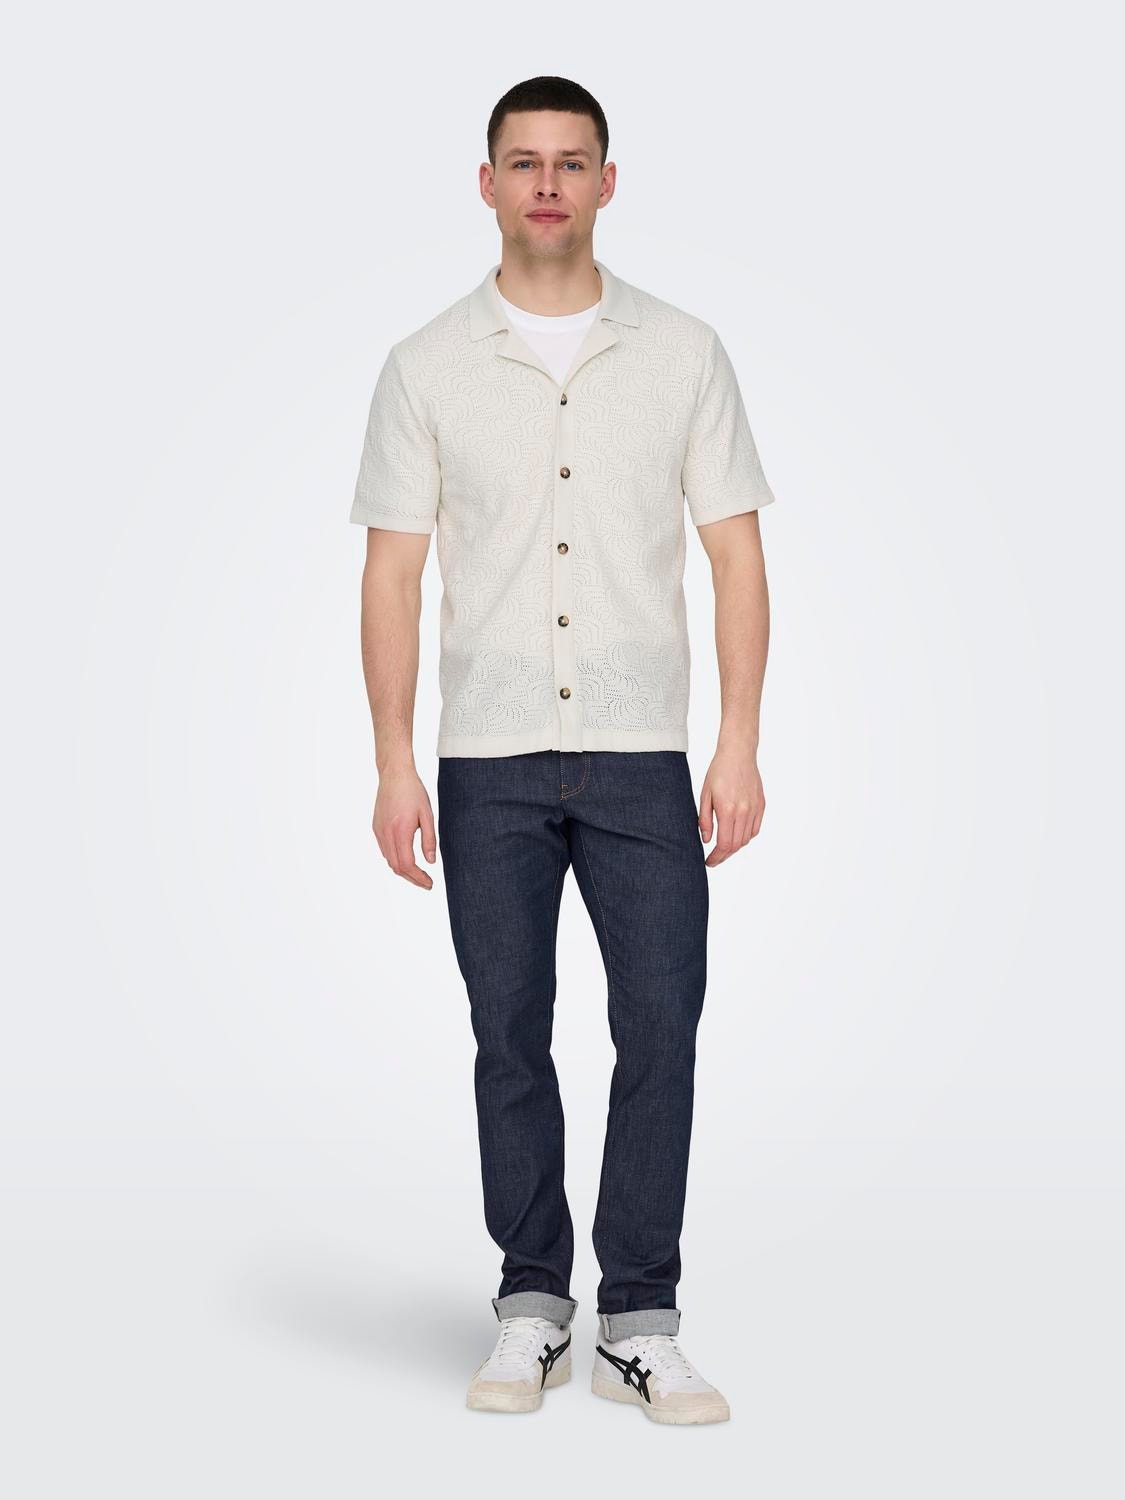 ONLY & SONS Short sleeved shirt -Antique White - 22028578